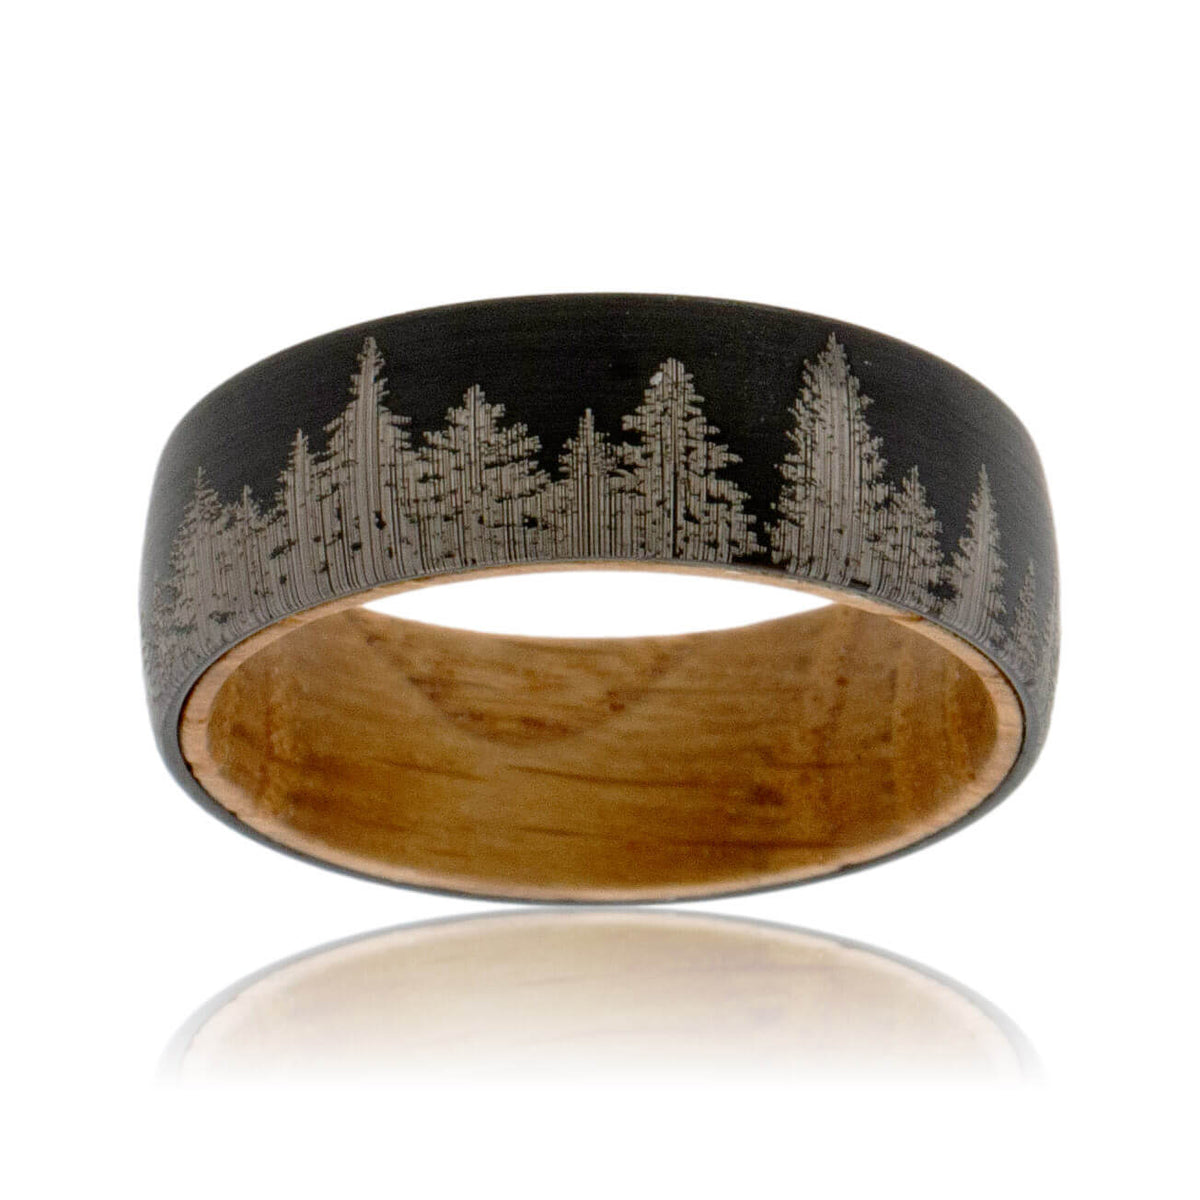 Black Tungsten & Whisky Barrel with Laser Engraved Treeline Ring - Park City Jewelers